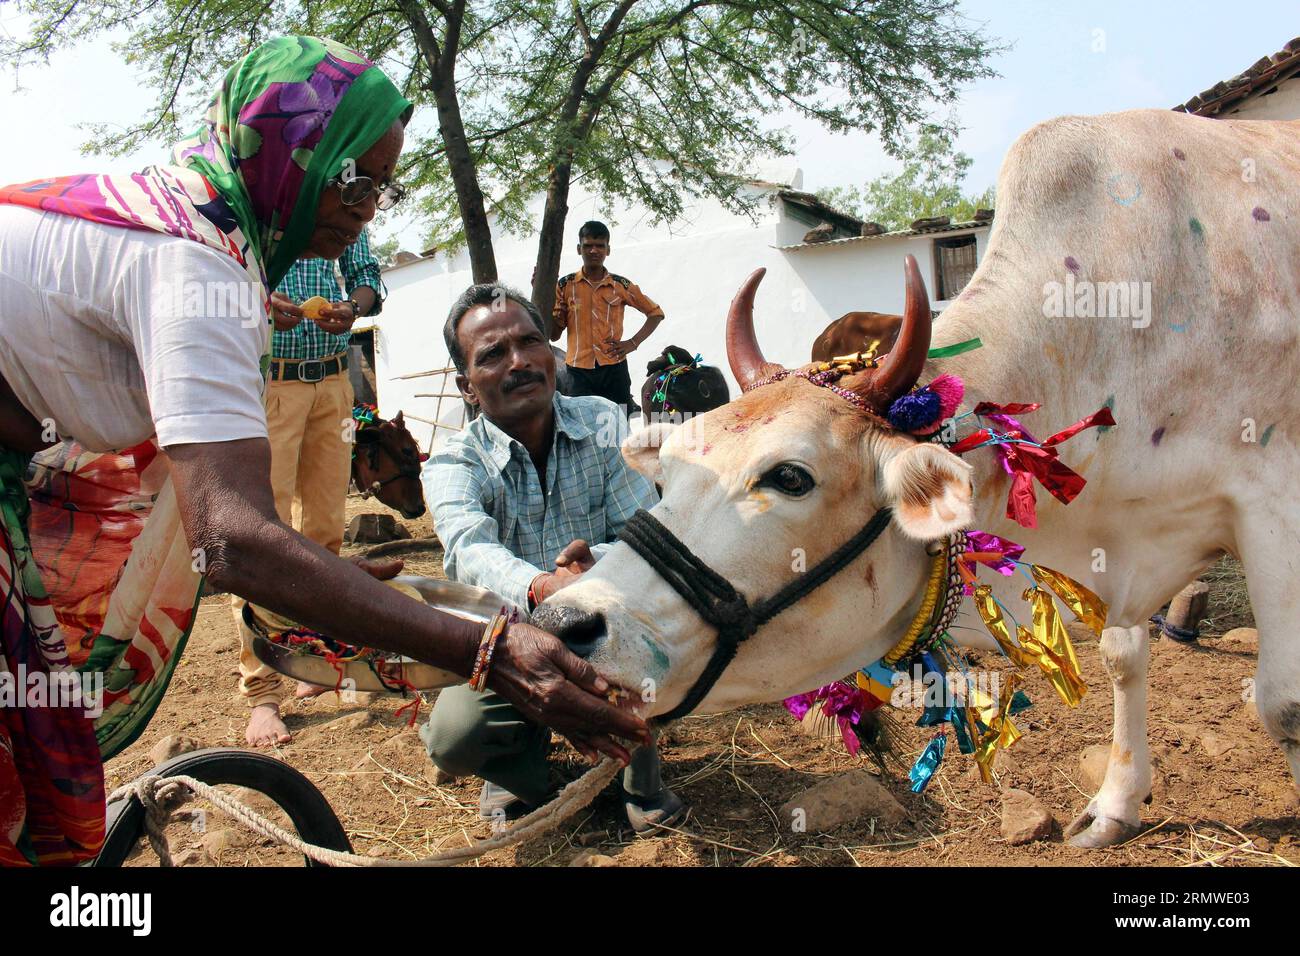 A Hindu village woman offers food to a decorated cow as part of a ritual during the Govardhan Puja festival in Bhopal, India, Oct. 24, 2014. Hindus believe that Lord Krishna lifted the Govardhan mountain on this day to save the villagers from excessive rains. ) INDIA-BHOPAL-FESTIVAL Stringer PUBLICATIONxNOTxINxCHN   a Hindu Village Woman OFFERS Food to a decorated Cow As Part of a Ritual during The Govardhan Puja Festival in Bhopal India OCT 24 2014 Hindus Believe Thatcher Lord Krishna lifted The Govardhan Mountain ON This Day to Save The Villagers from excessive Rains India Bhopal Festival St Stock Photo